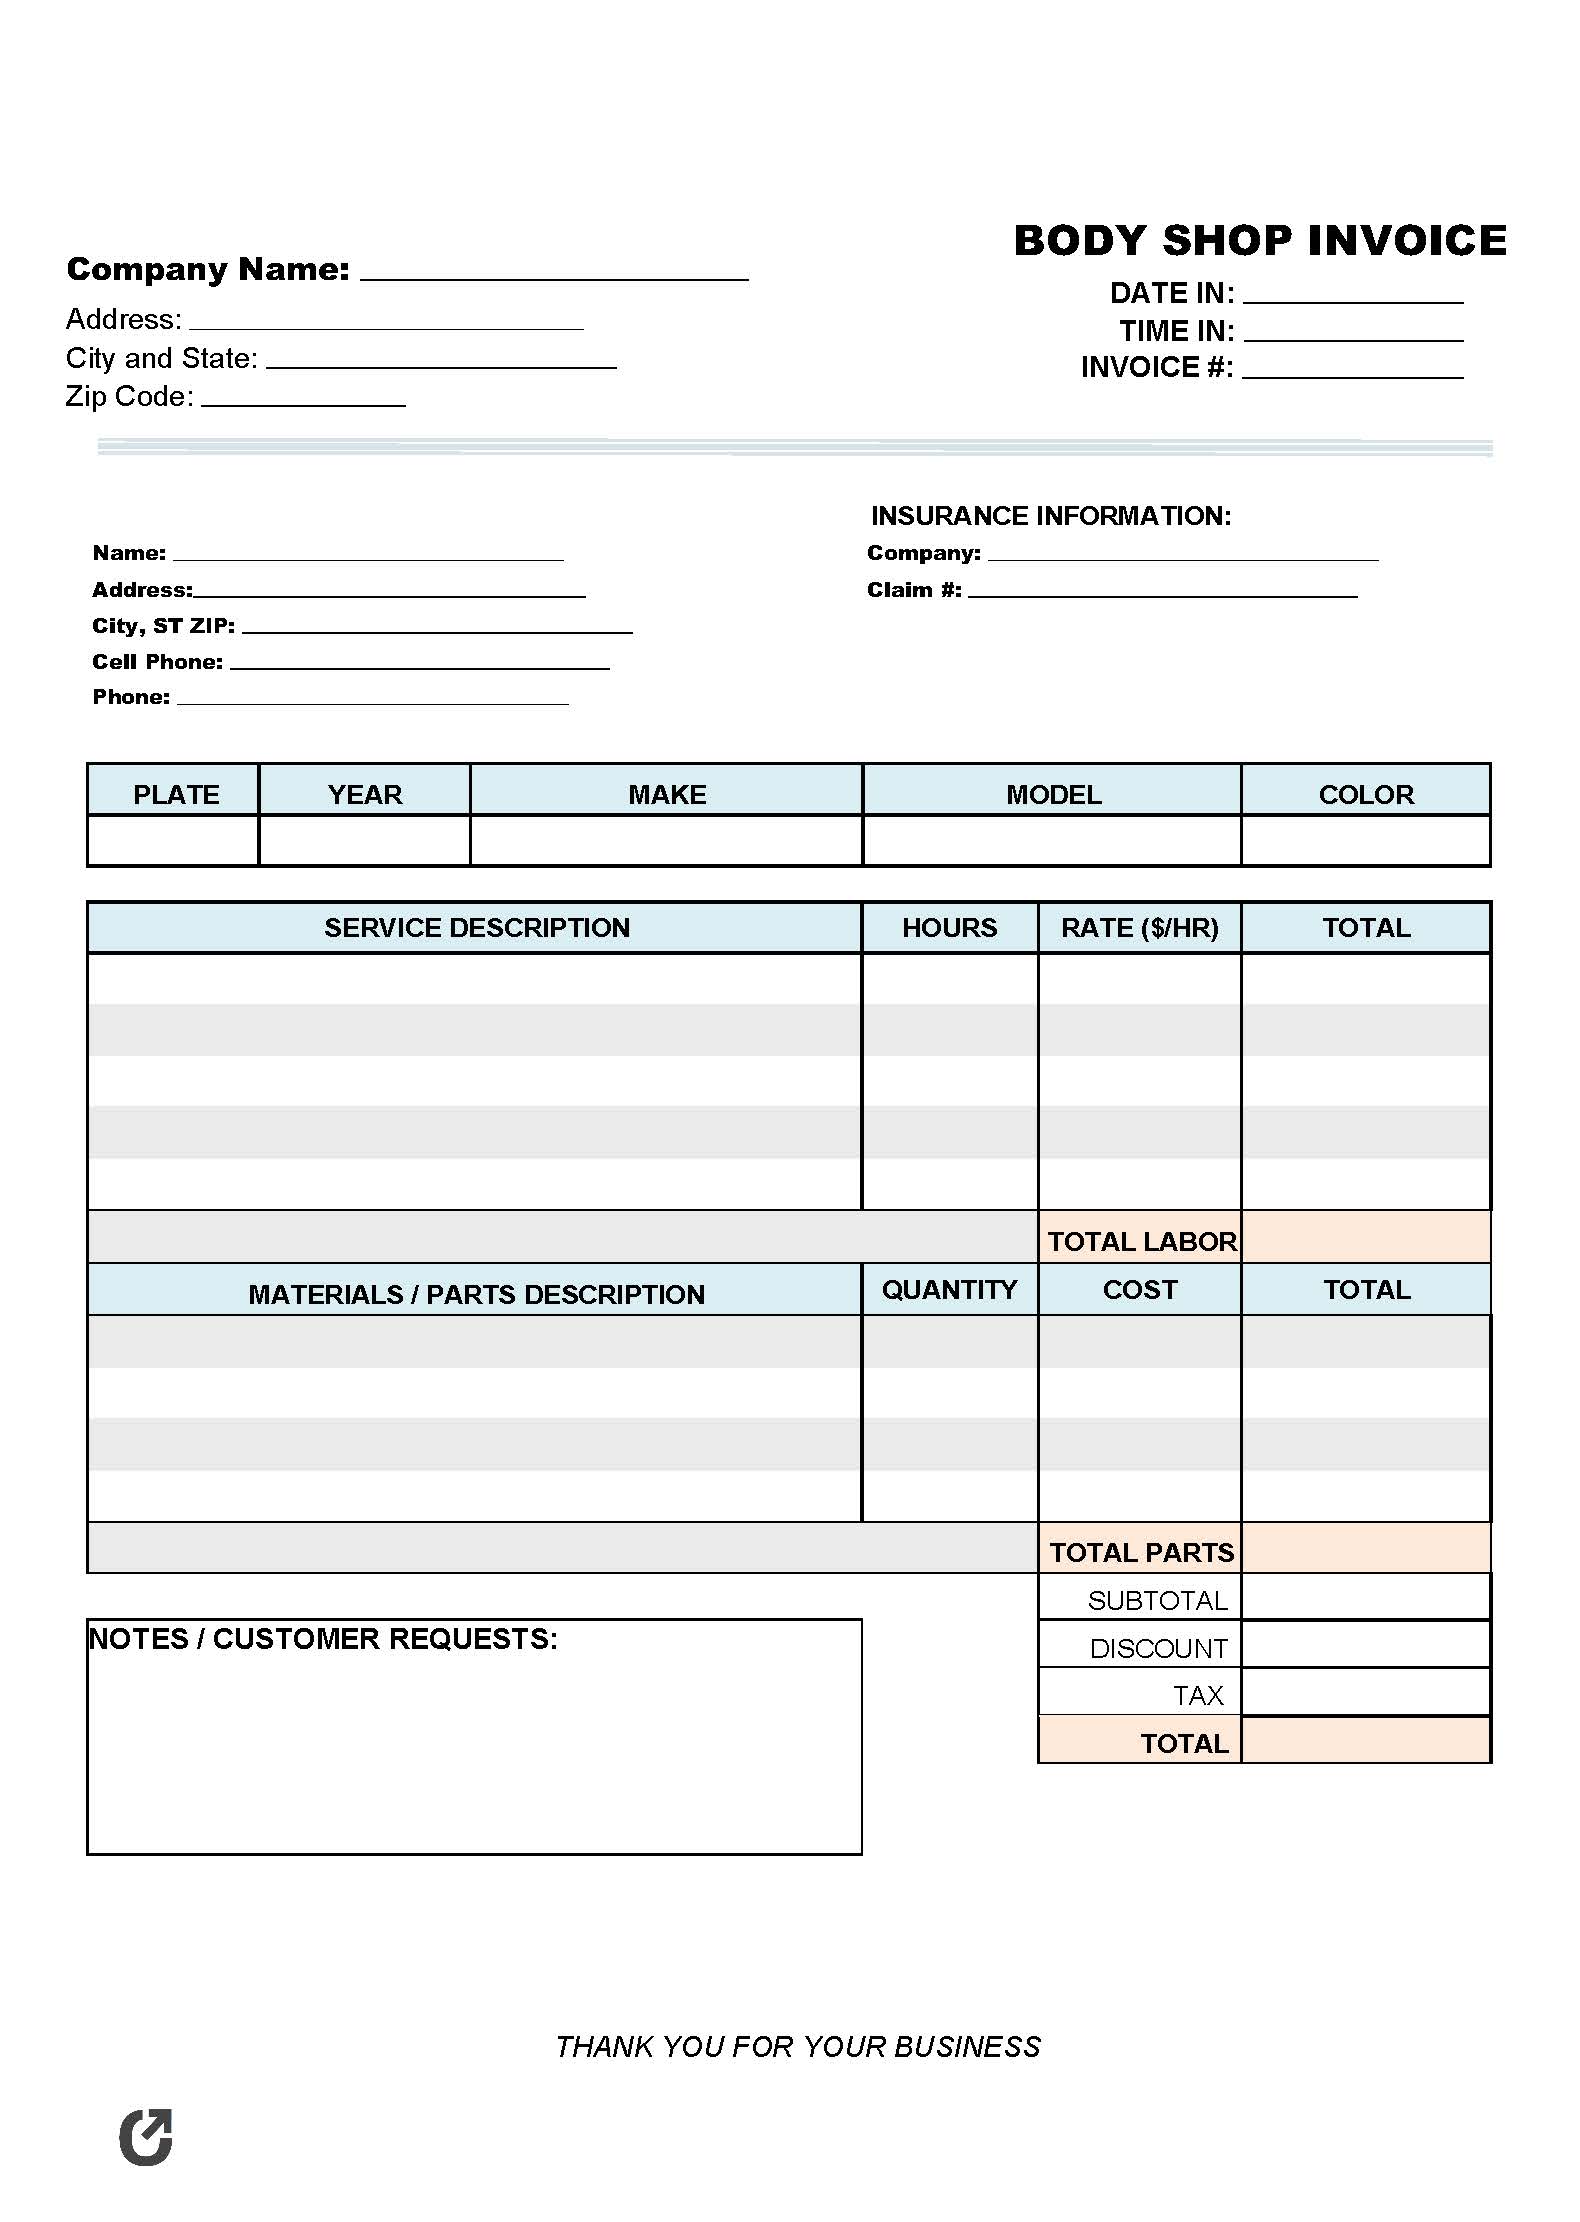 Free Body Shop Invoice Template  PDF  WORD  EXCEL Throughout Auto Repair Invoice Template Word